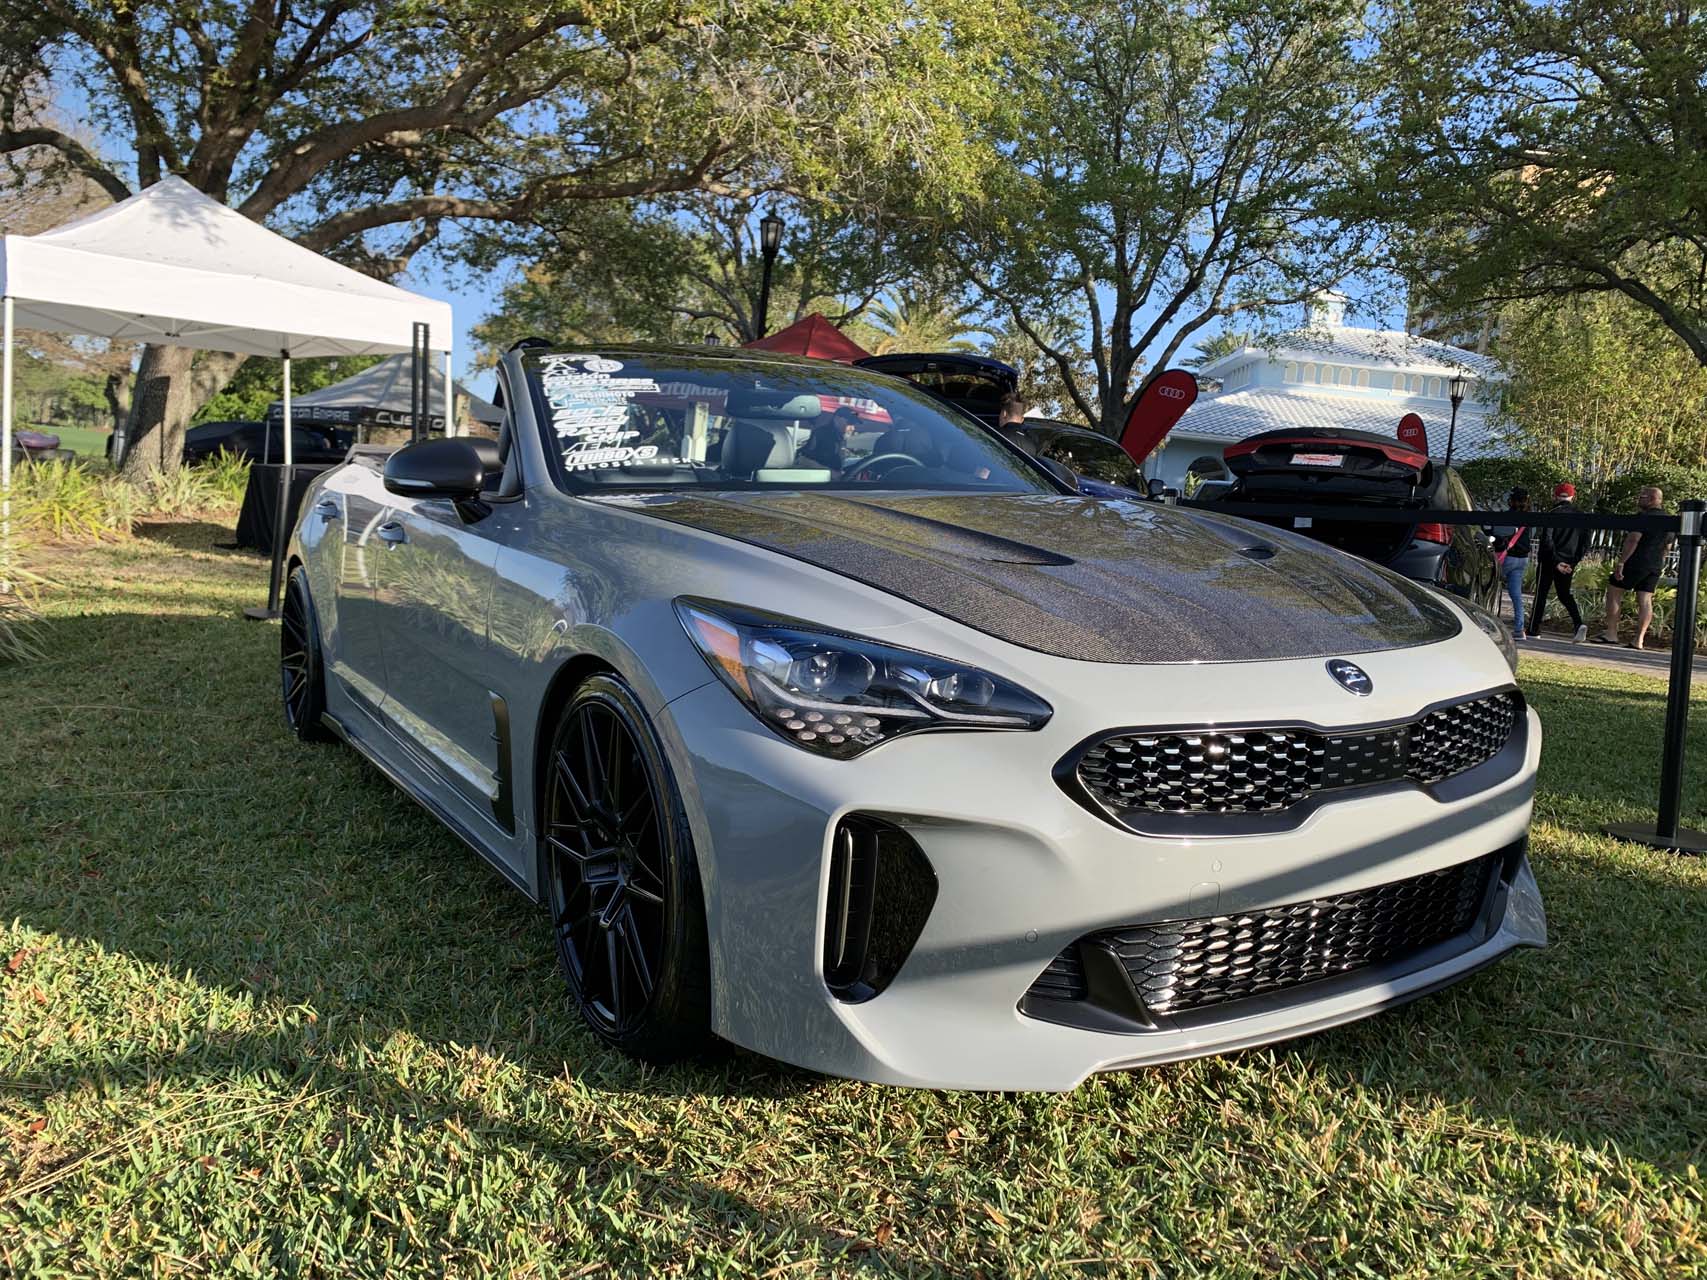 A Kia Stinger convertible exists and it's wild